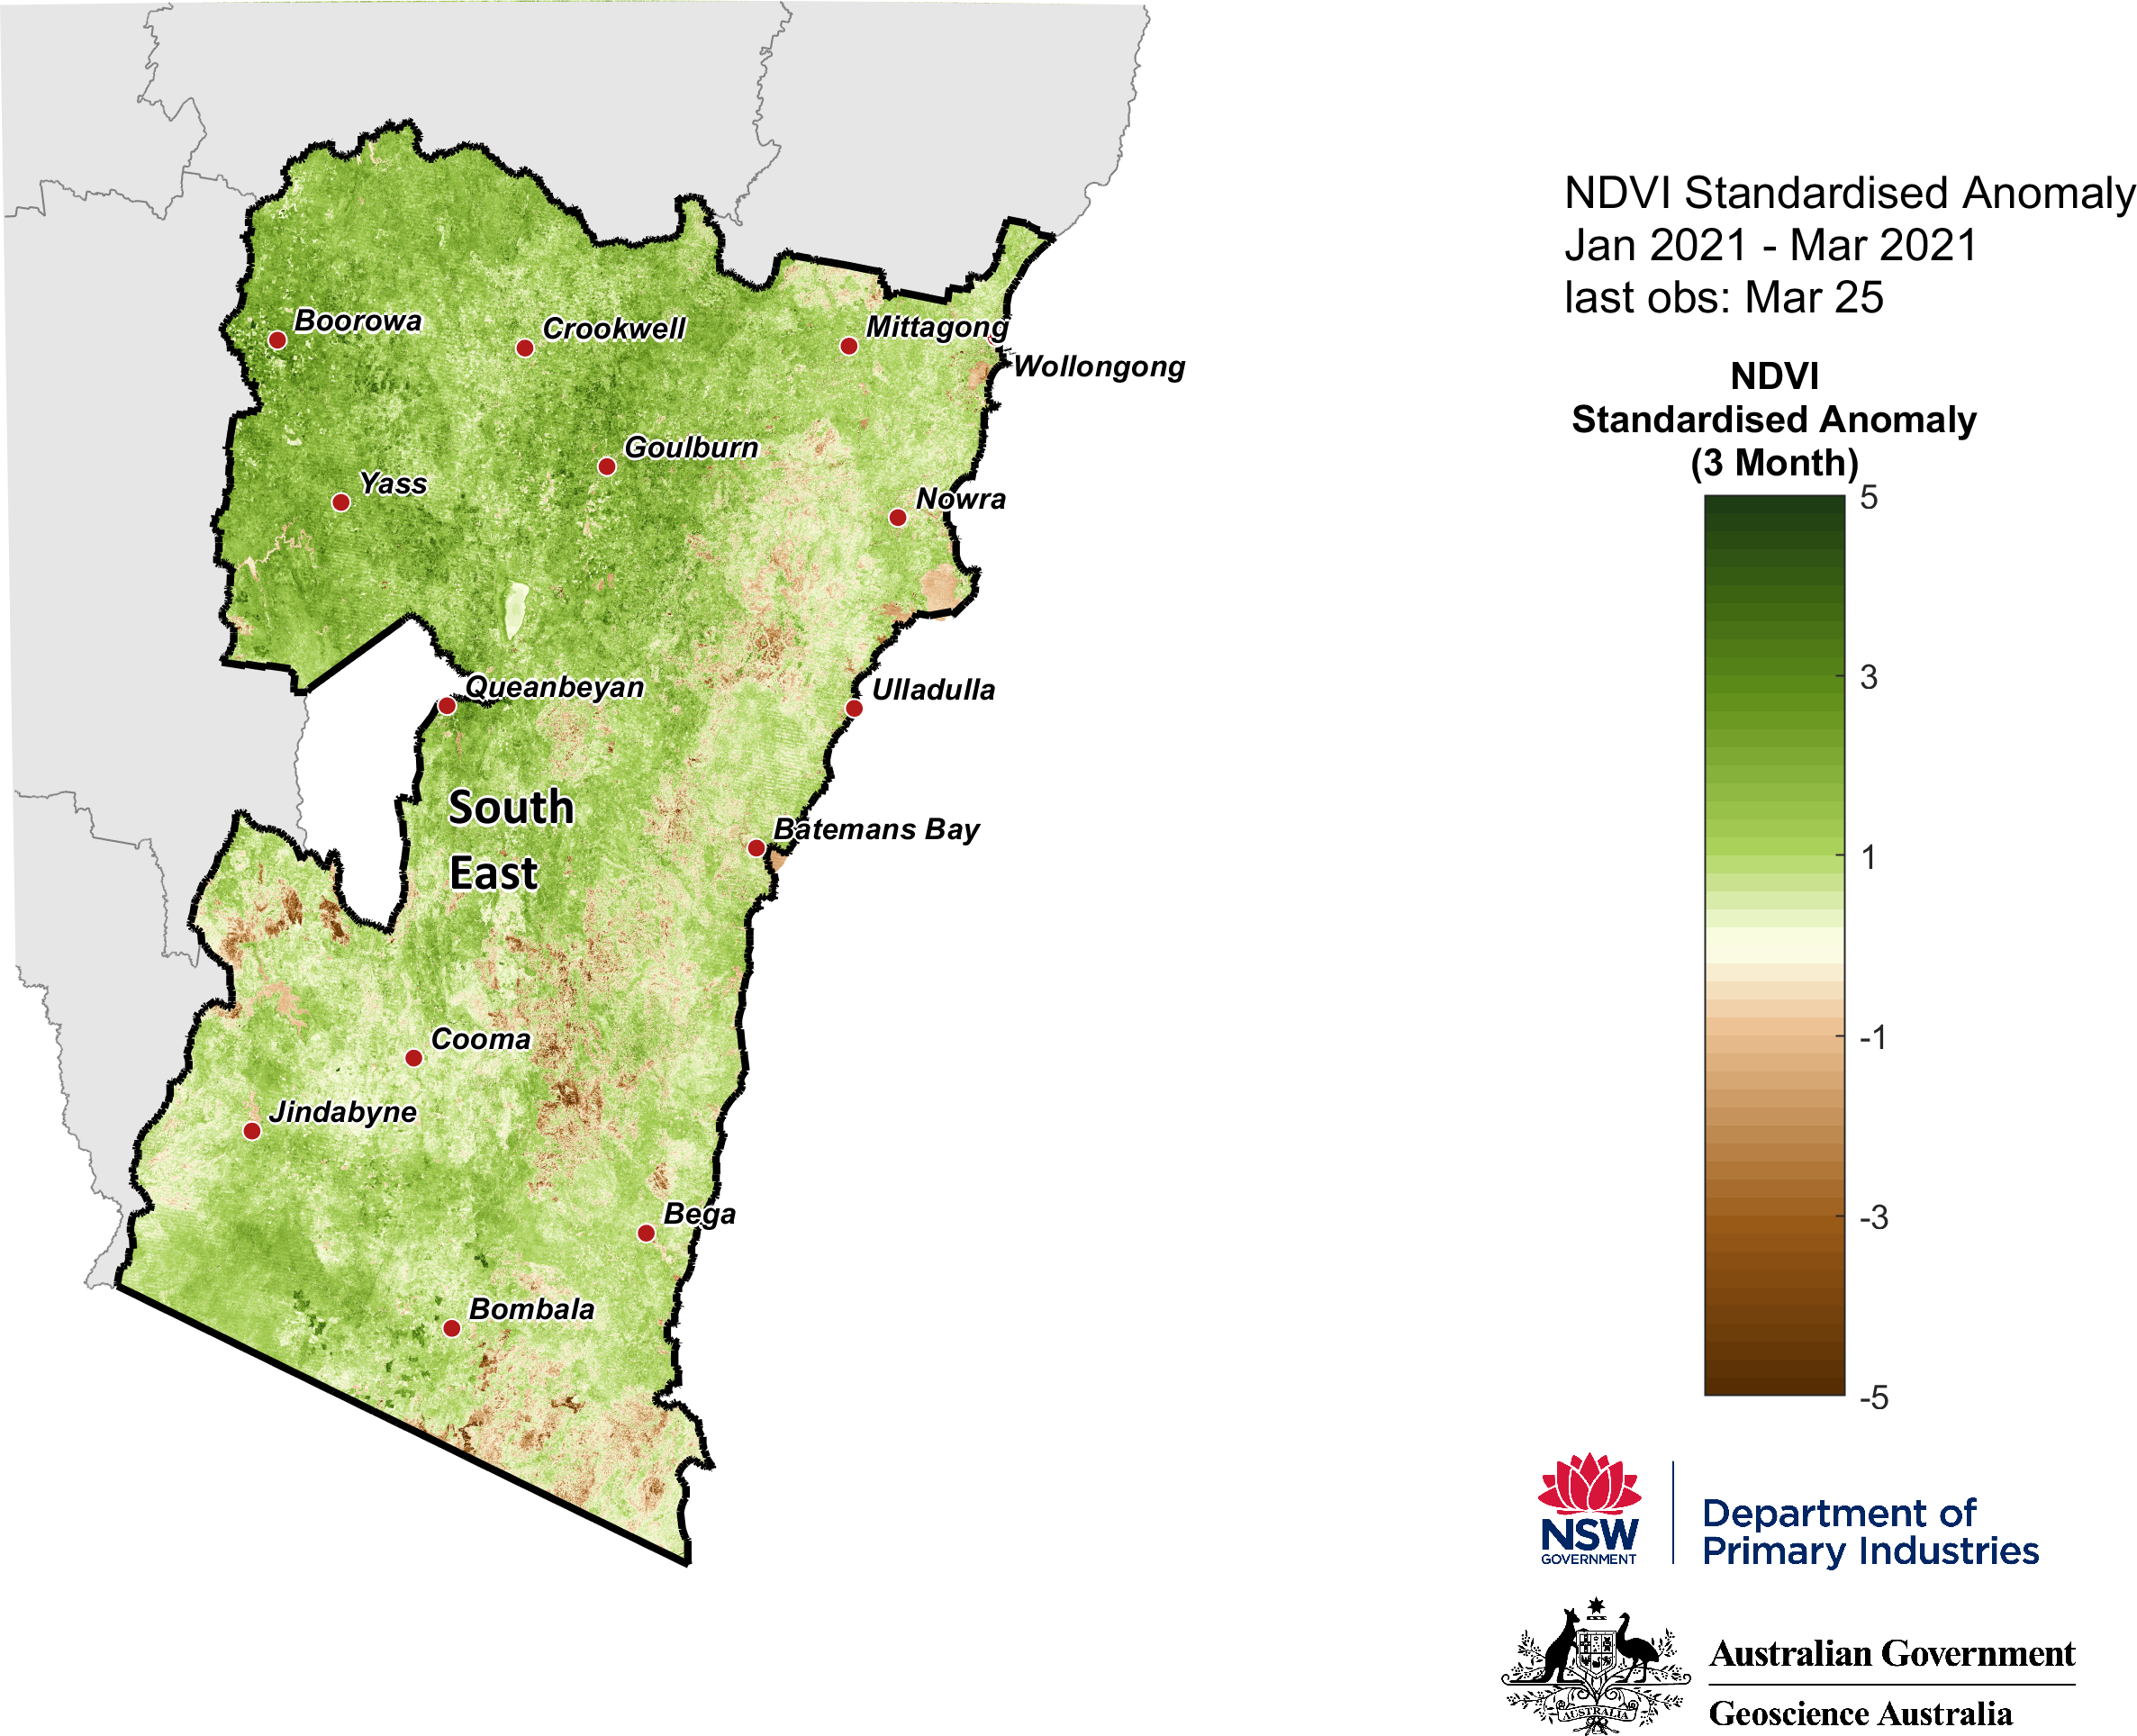 For an accessible explanation of this image contact the author seasonal.conditions@dpi.nsw.gov.au